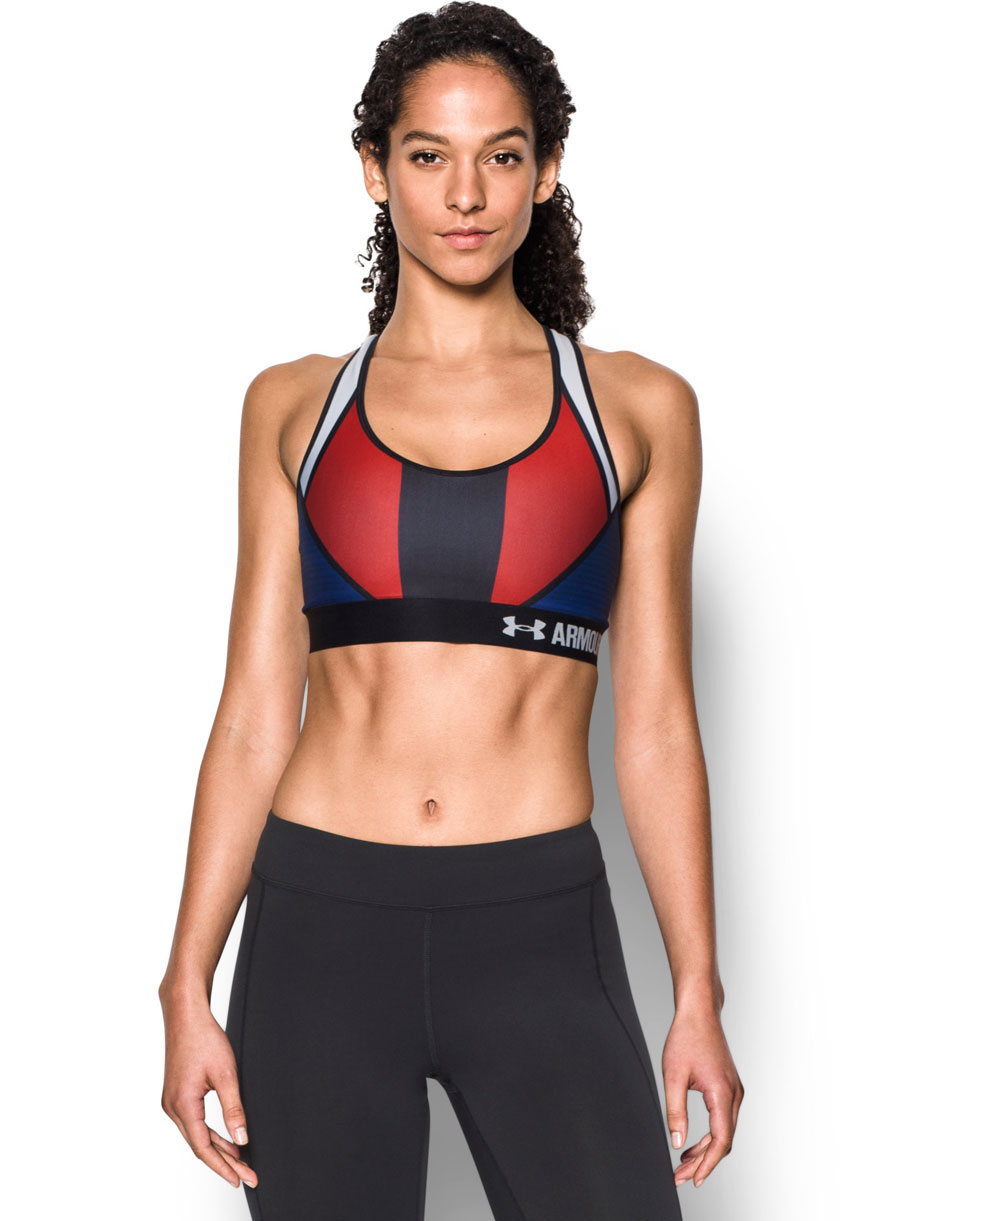 https://www.anygivensunday.shop/1532-large_default/under-armour-womens-sports-bra-armour-mid-usa-american-blue.jpg